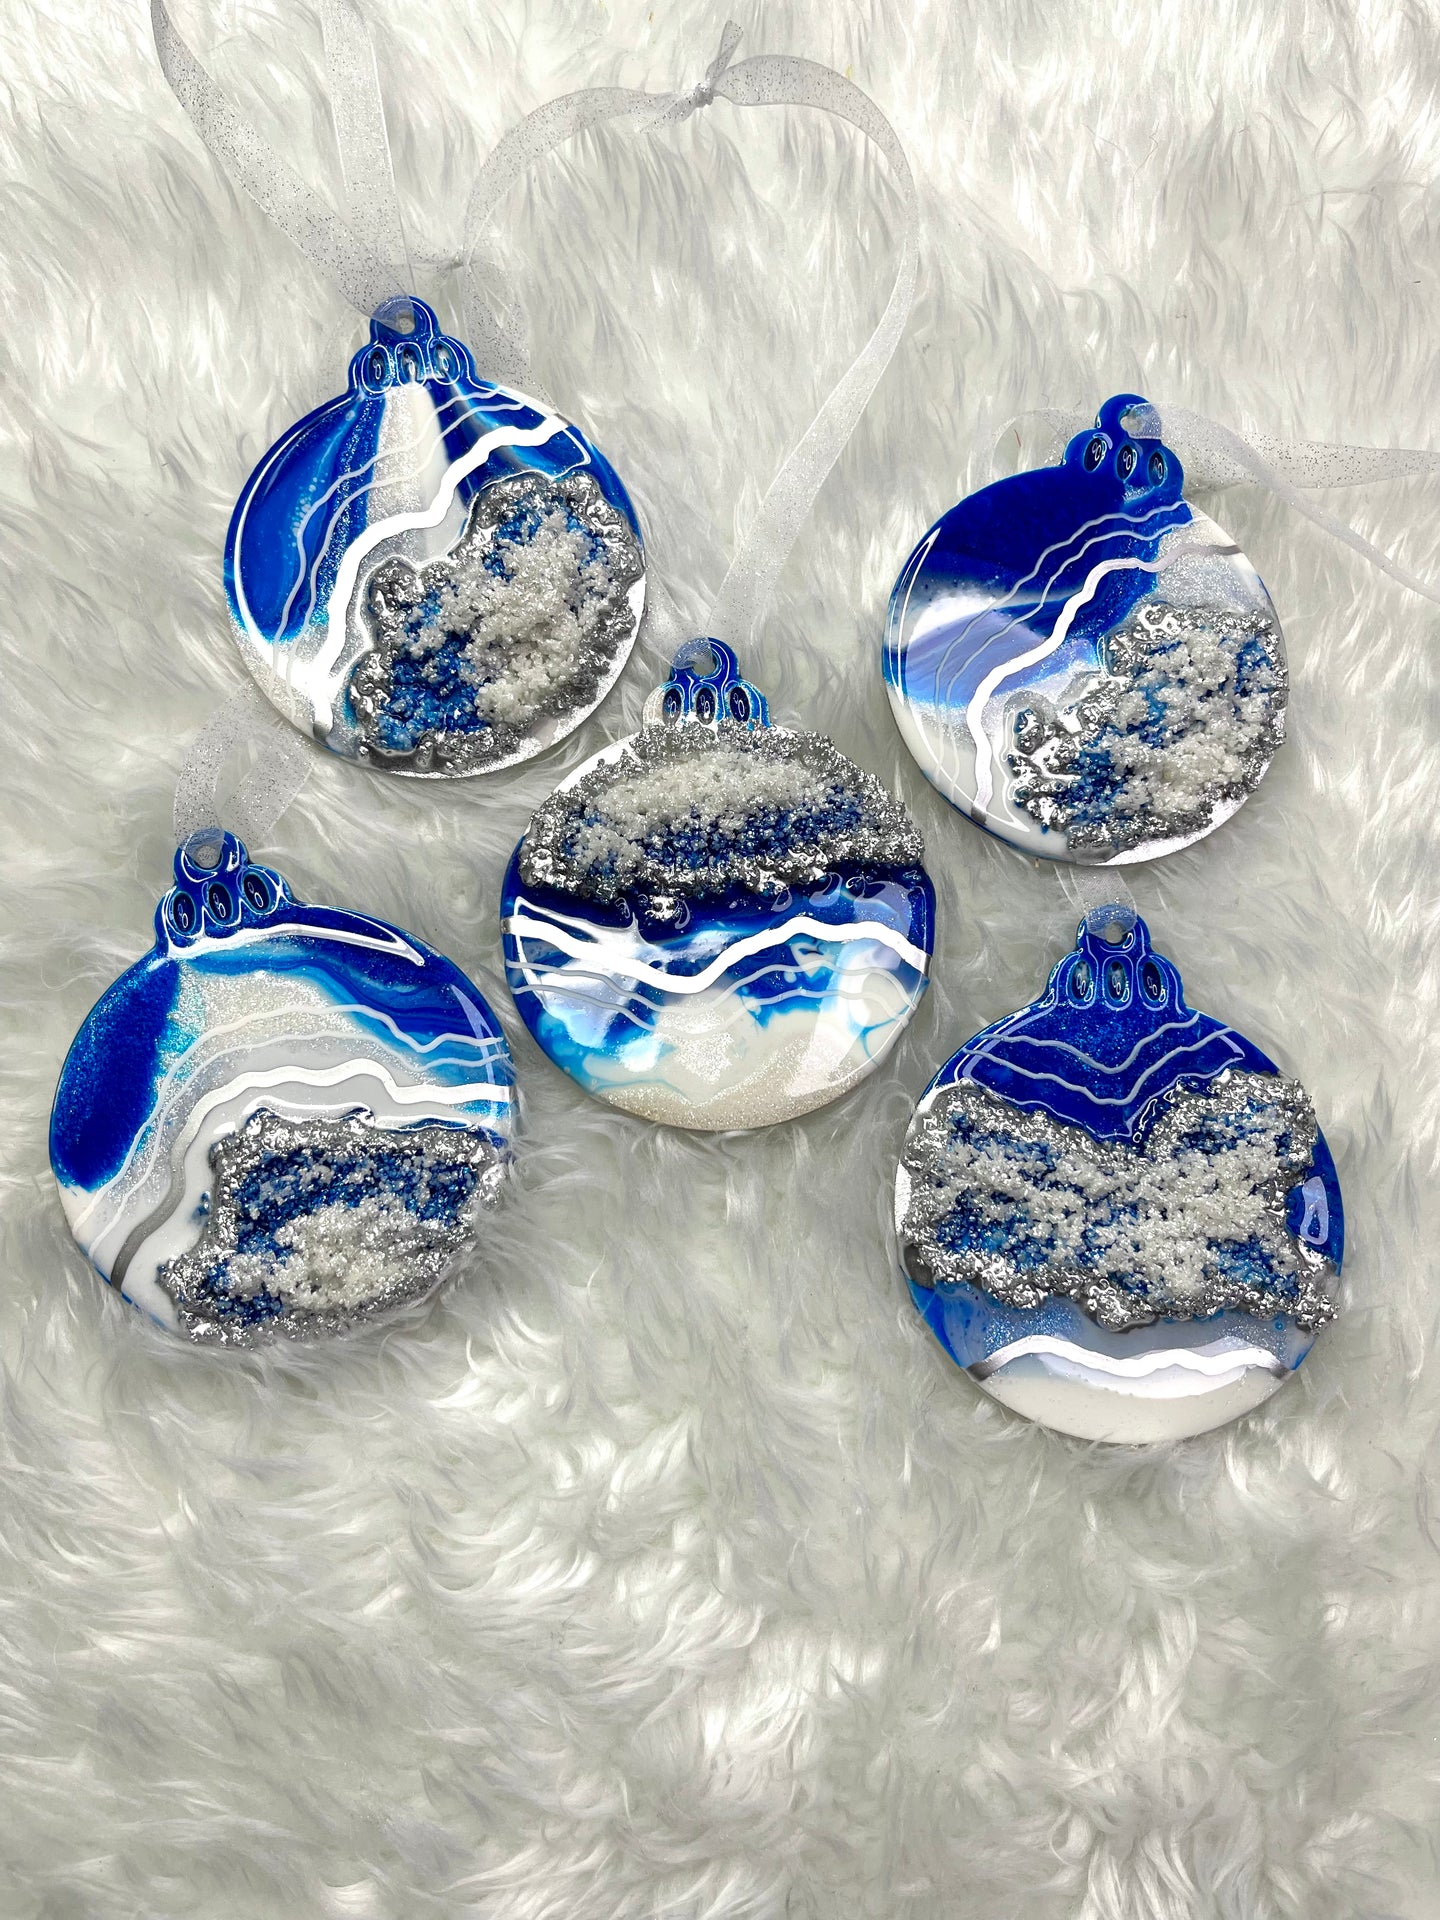 Luxe Geode Ornaments - 5 Count Set: Silver, Blue & White